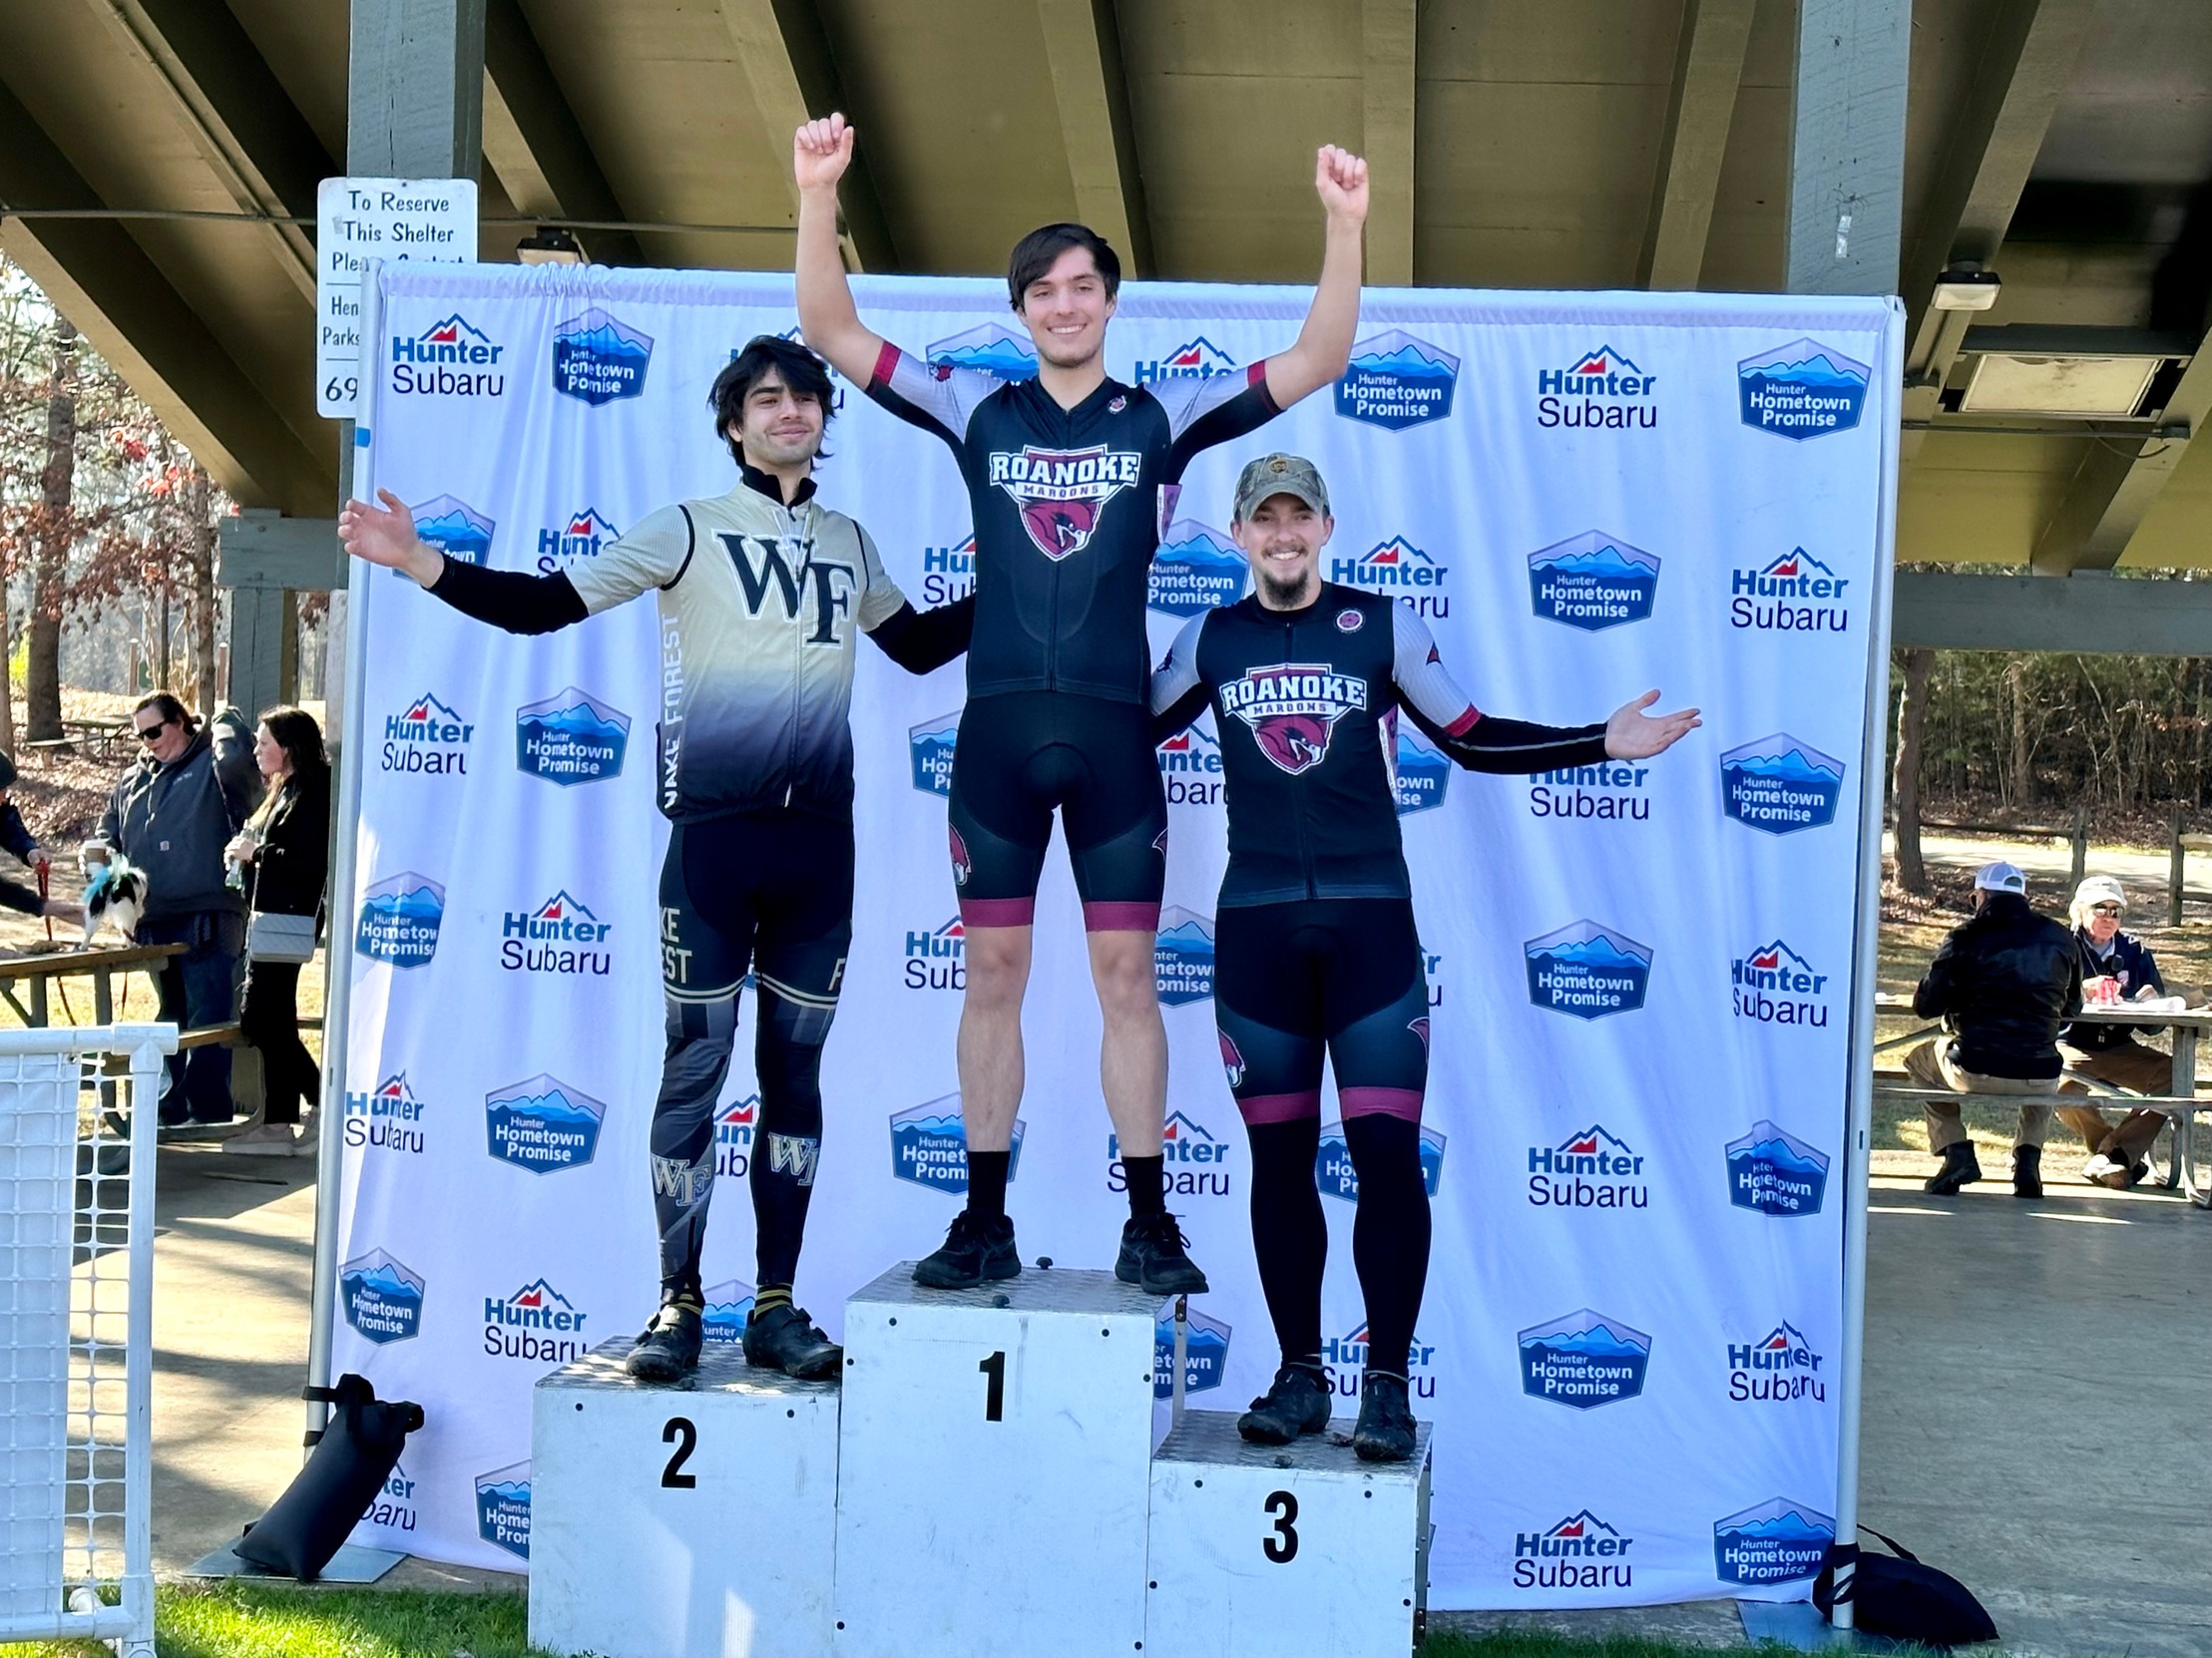 Edmunds Wins Twice As All Three Maroons Make the Podium